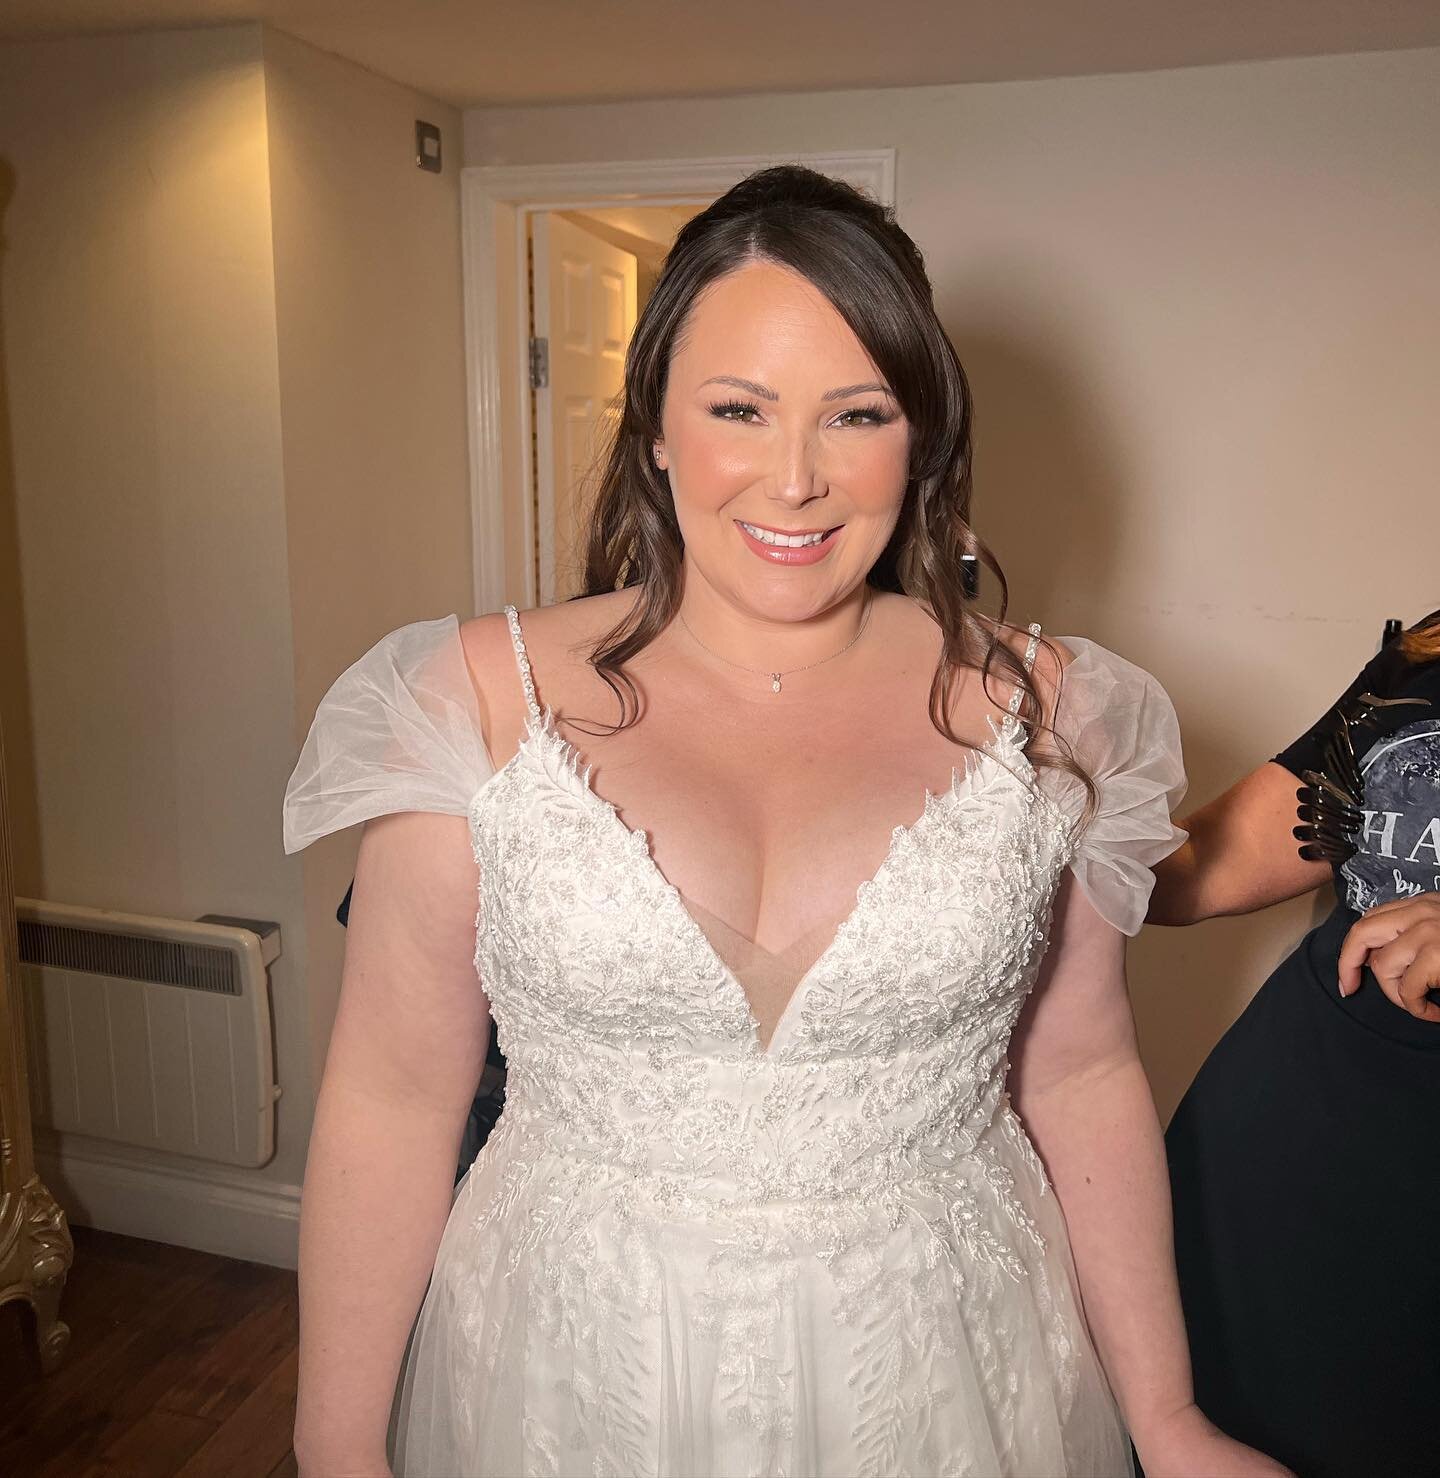 Claire your one Happy Bride. So Beautiful ✨✨Finally get your day. So glad I was able to be part of it. Glowing with bronze contoured the bridal way. ✨✨ venue @vaultymanor